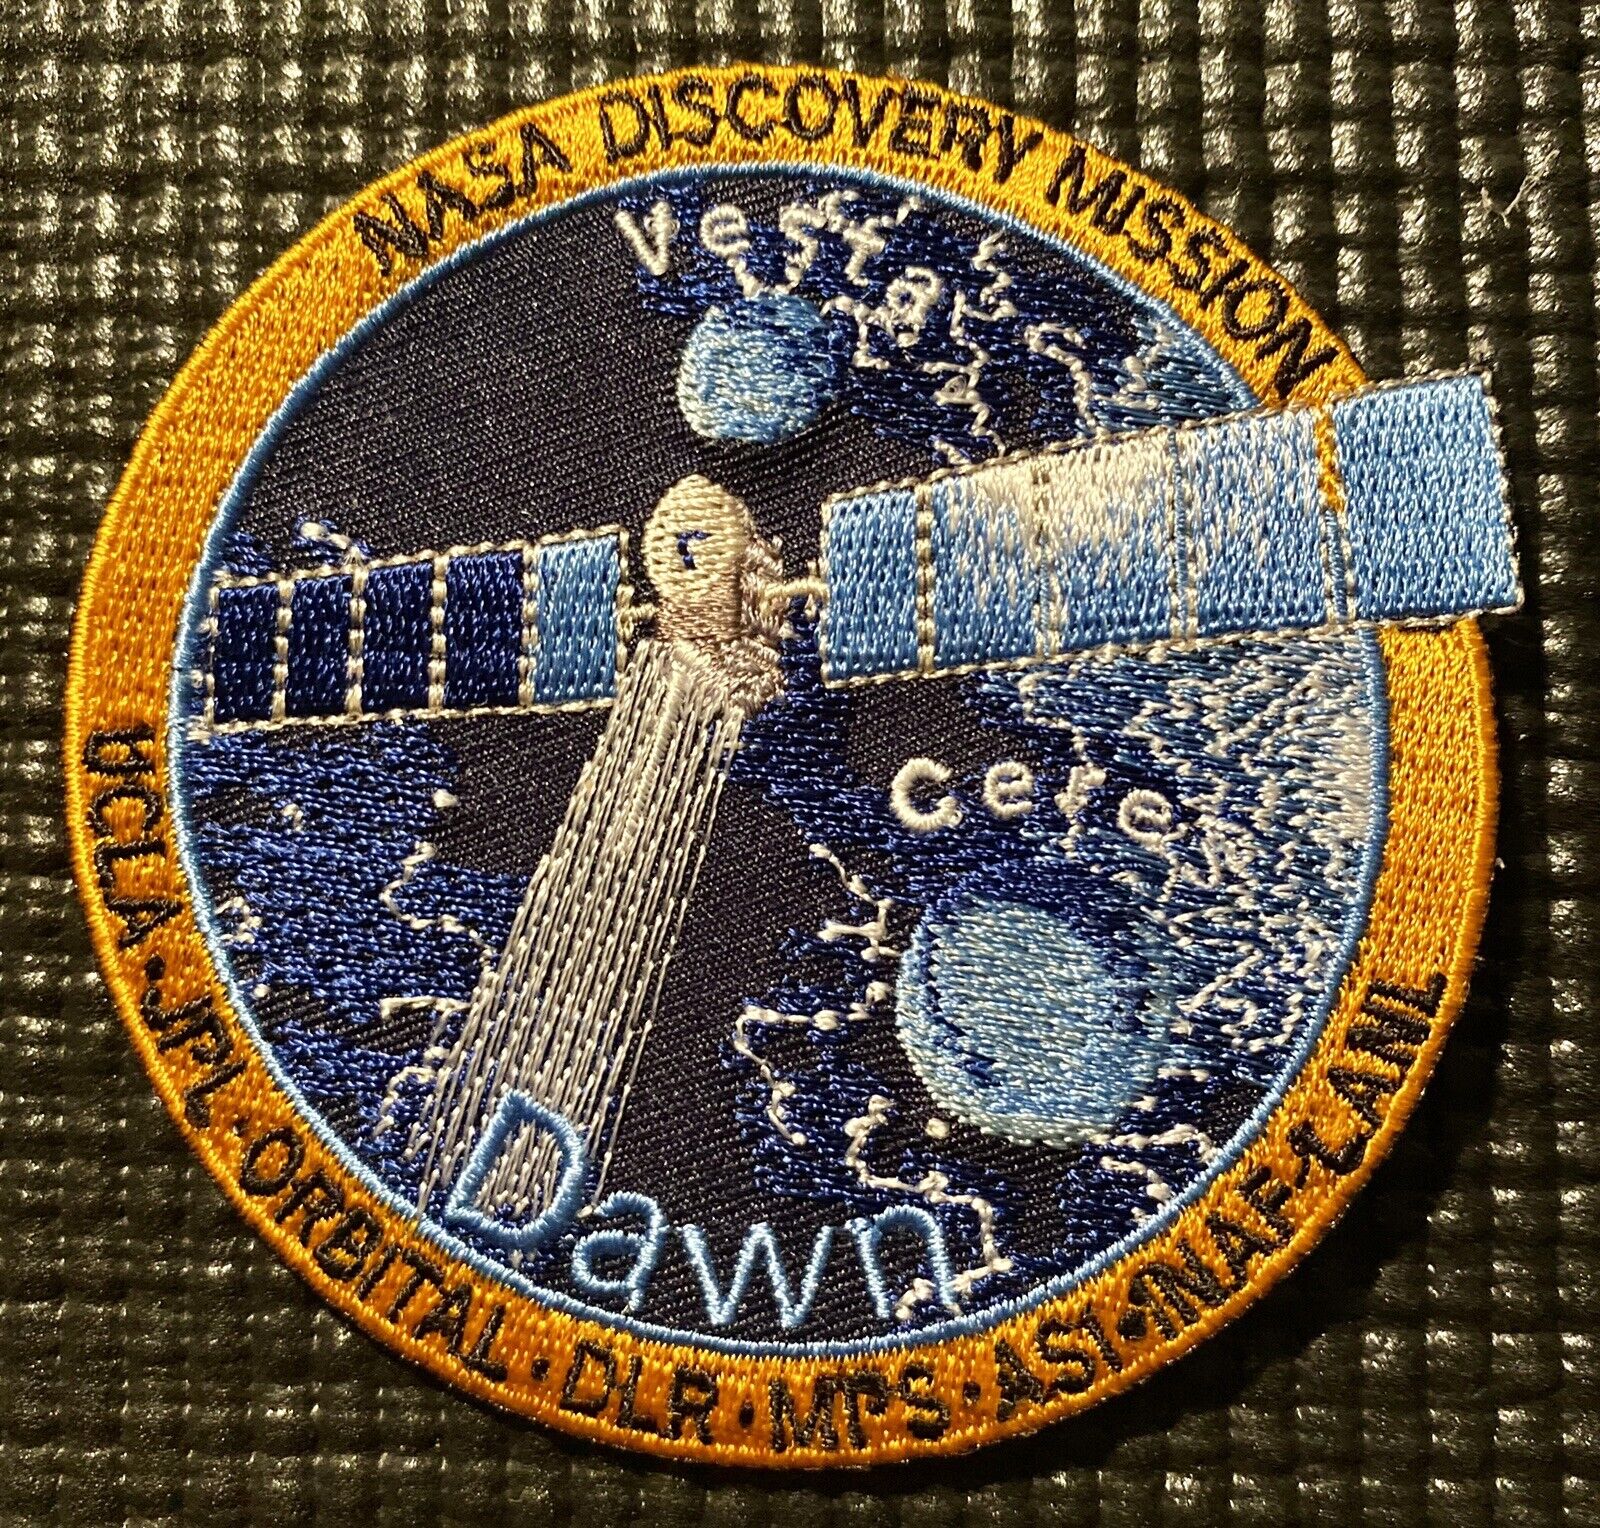 NASA JPL DAWN DISCOVERY MISSION - VESTA - CERES - UCLA - SPACE PATCH - 3.5